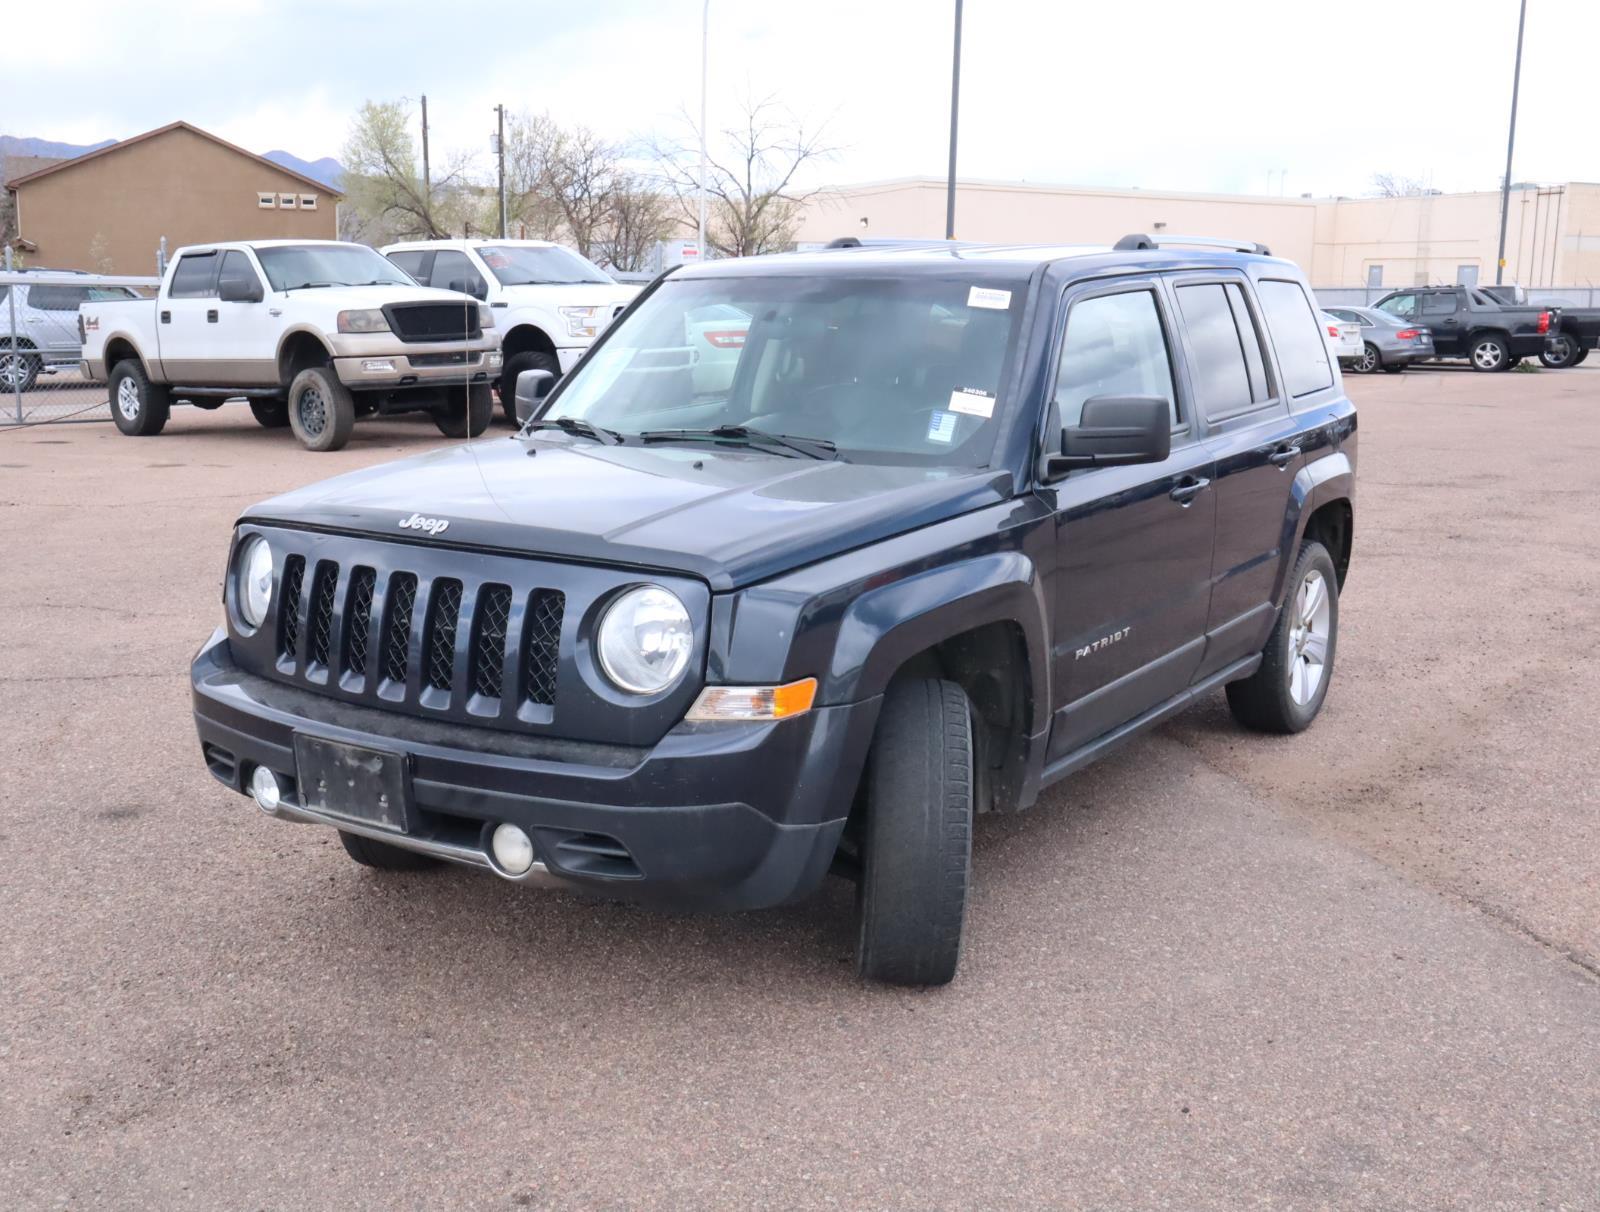 Used Vehicles in Colorado Springs, CO